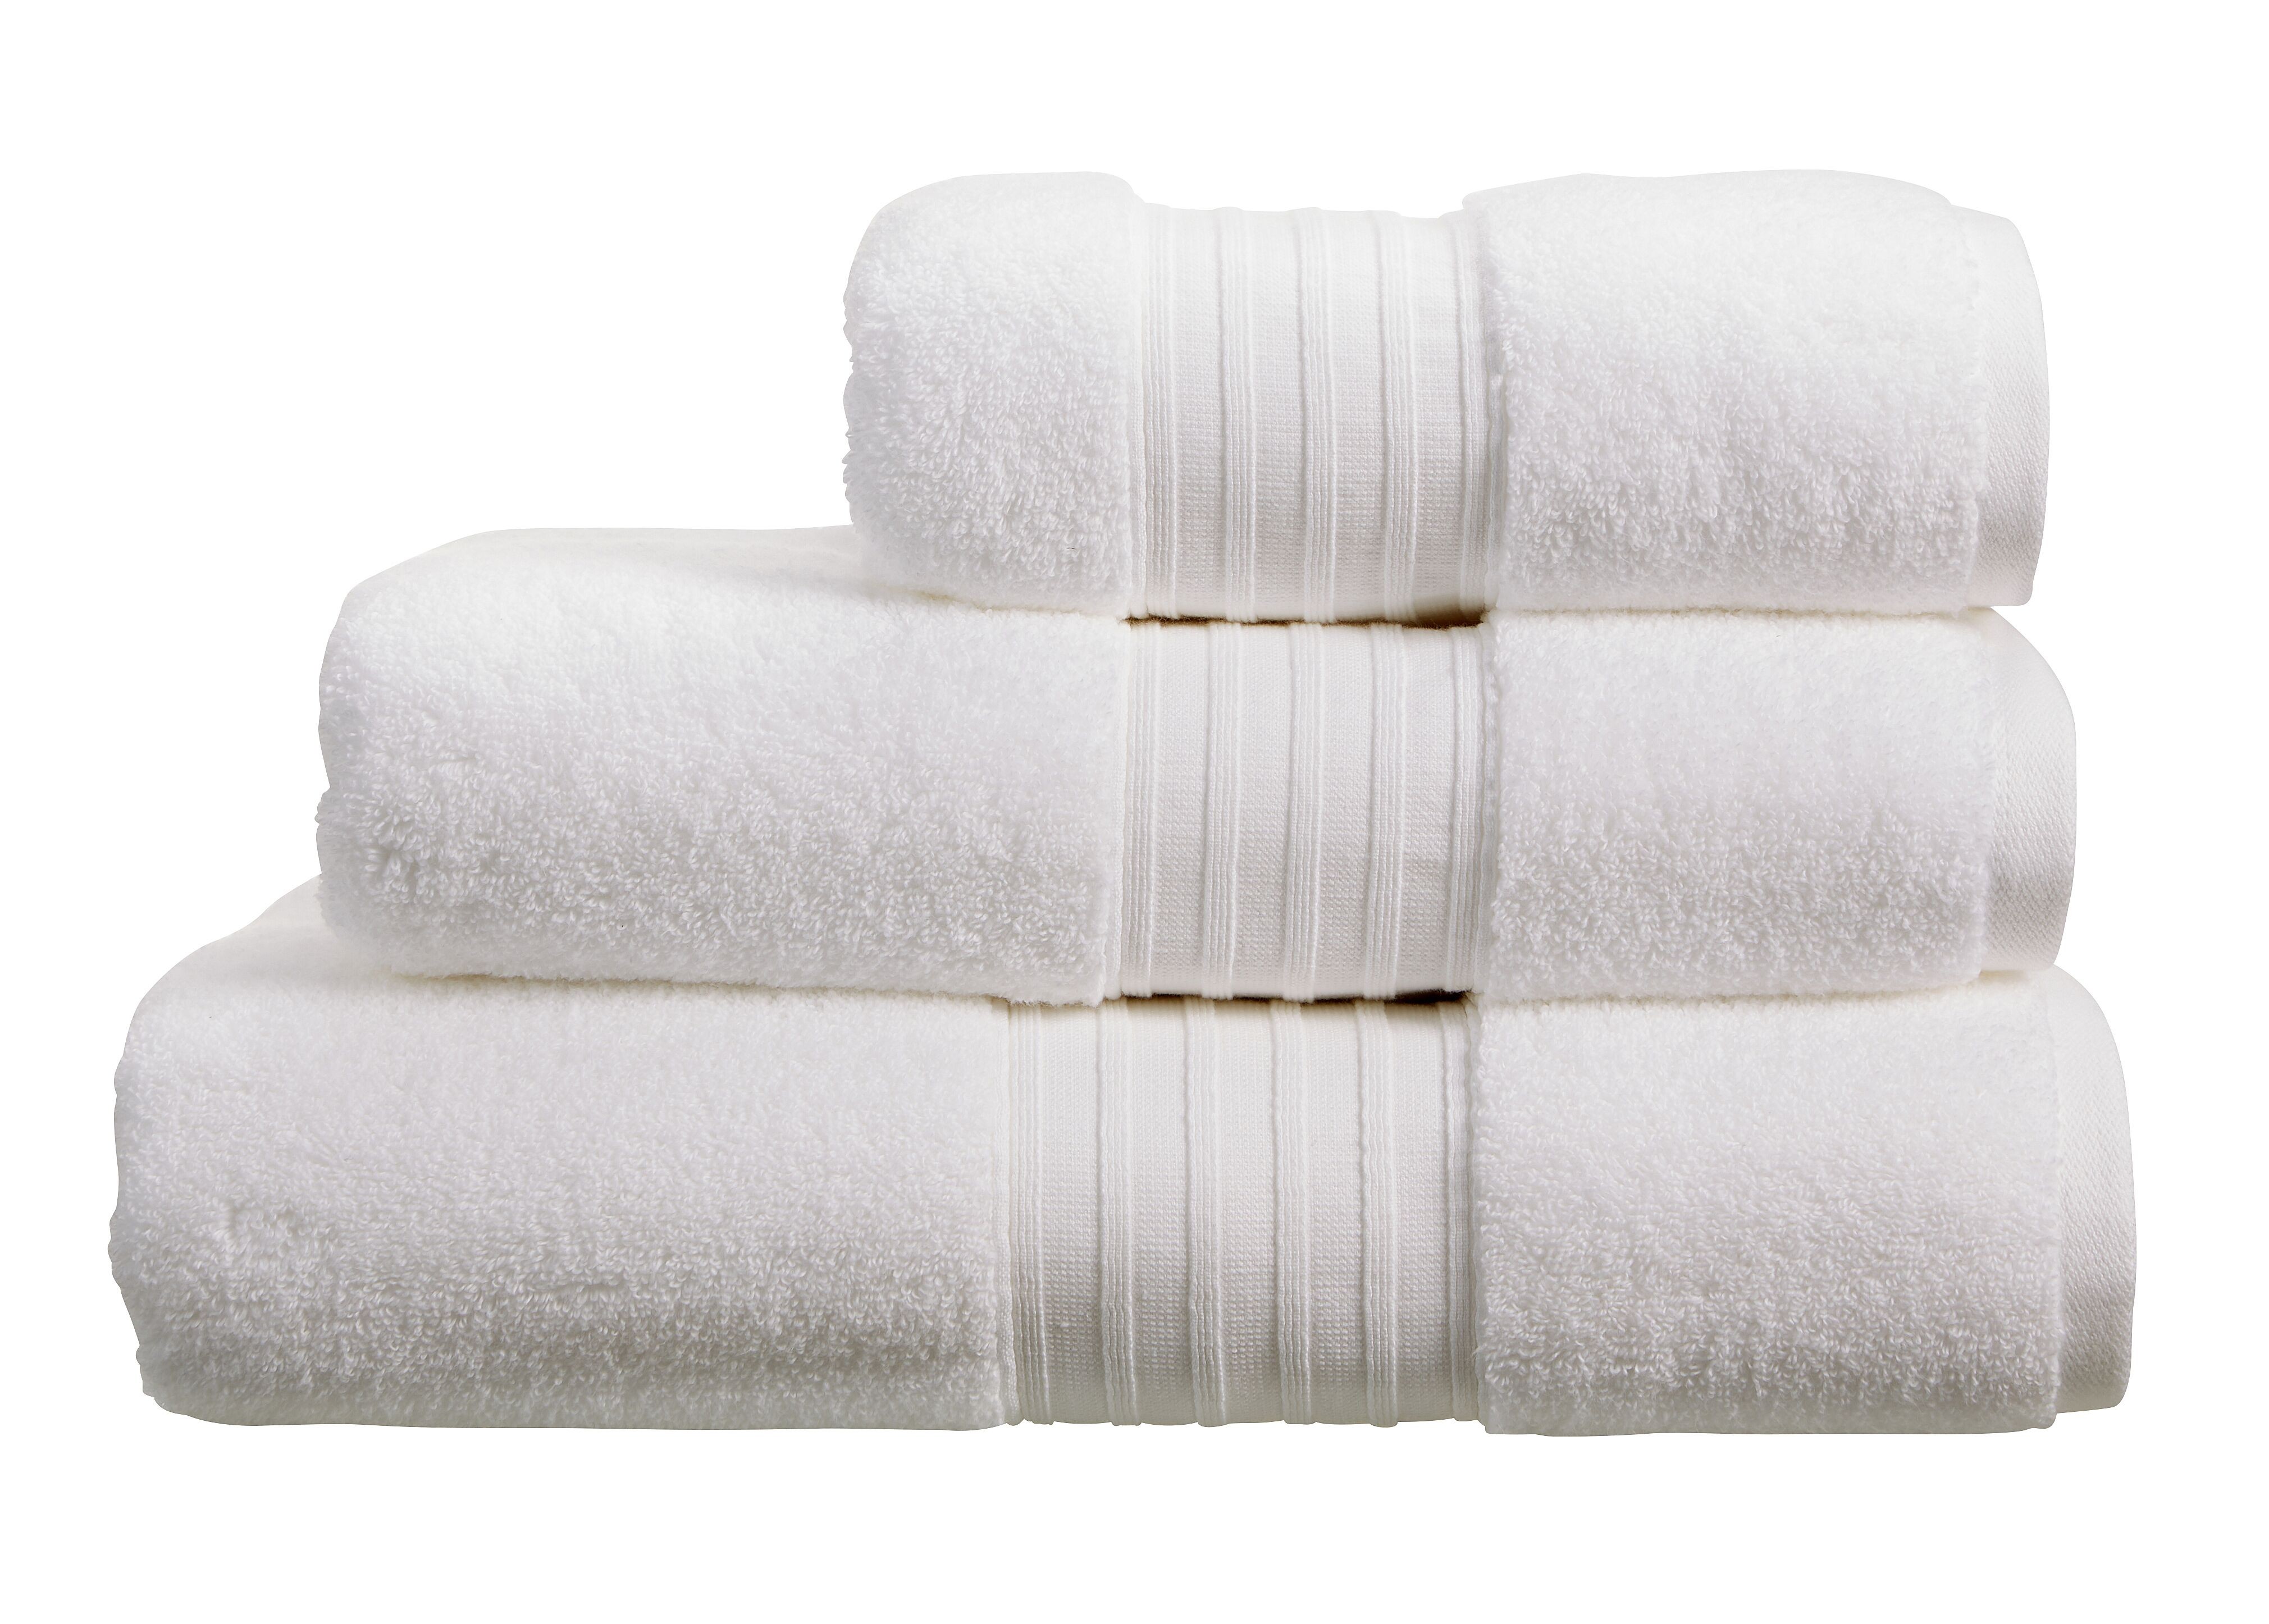 Pack of 3 Optimum Bath Towels (Available in 4 Colours)